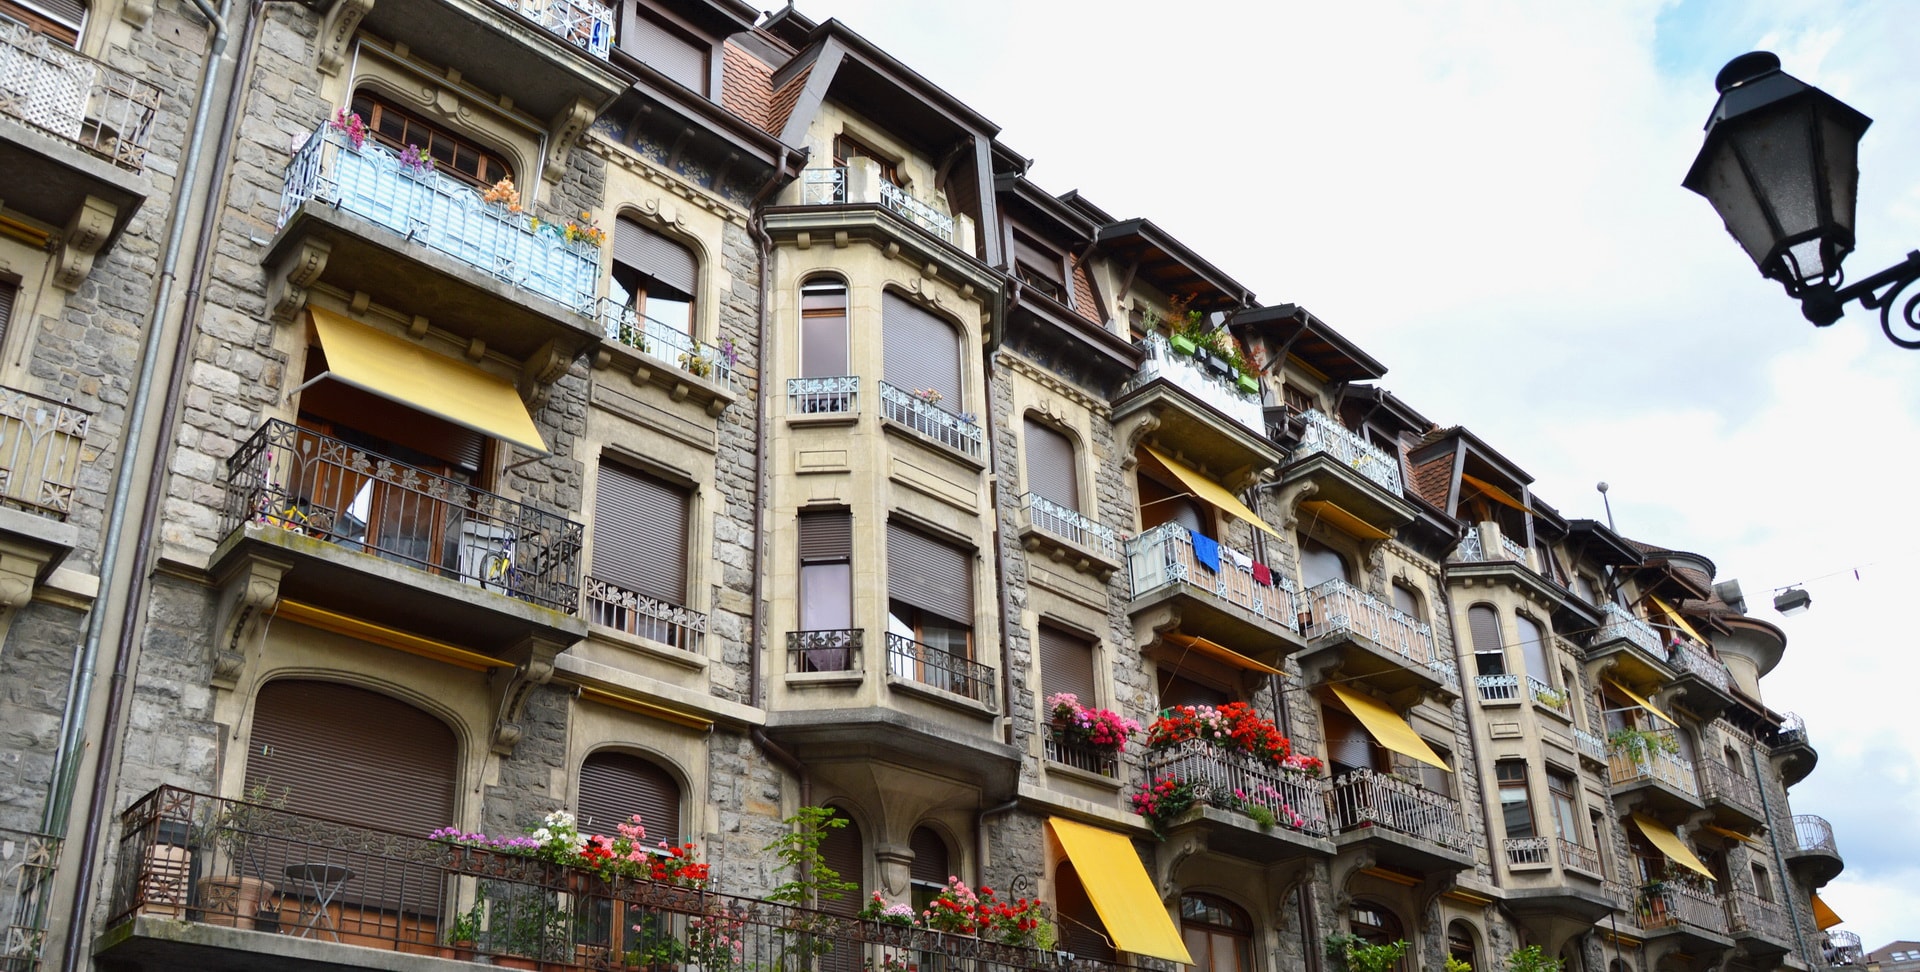 Beautiful architecture in the streets of Montreux